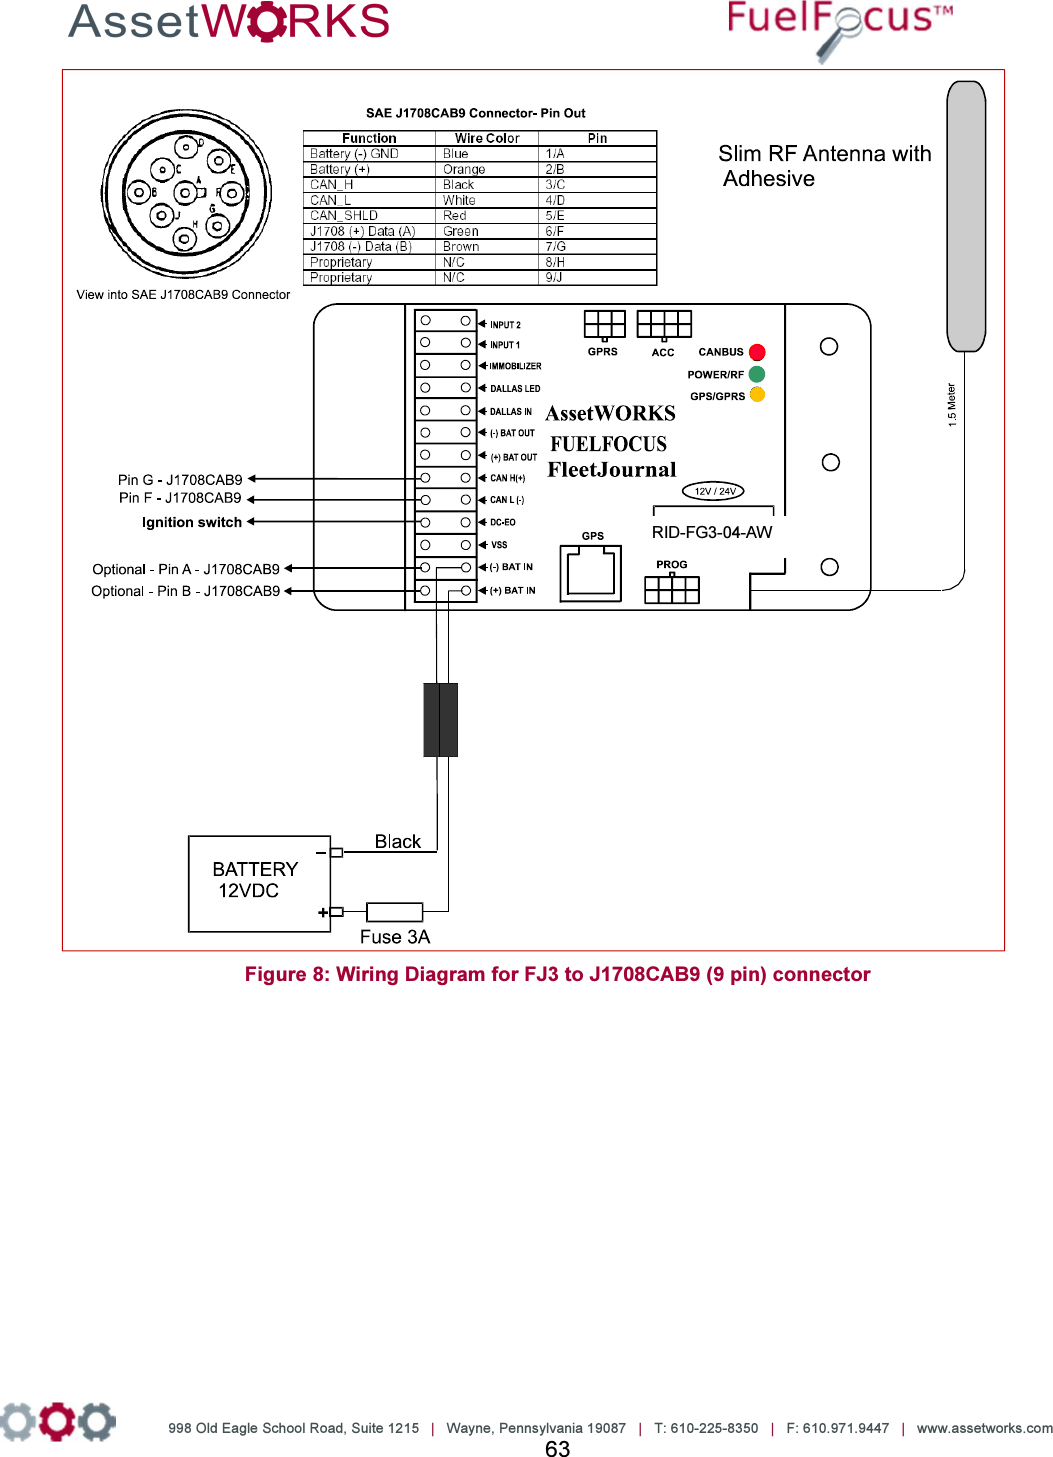                     998 Old Eagle School Road, Suite 1215   |   Wayne, Pennsylvania 19087   |   T: 610-225-8350   |   F: 610.971.9447   |   www.assetworks.com 63   Figure 8: Wiring Diagram for FJ3 to J1708CAB9 (9 pin) connector   RID-FG3-04-AW 